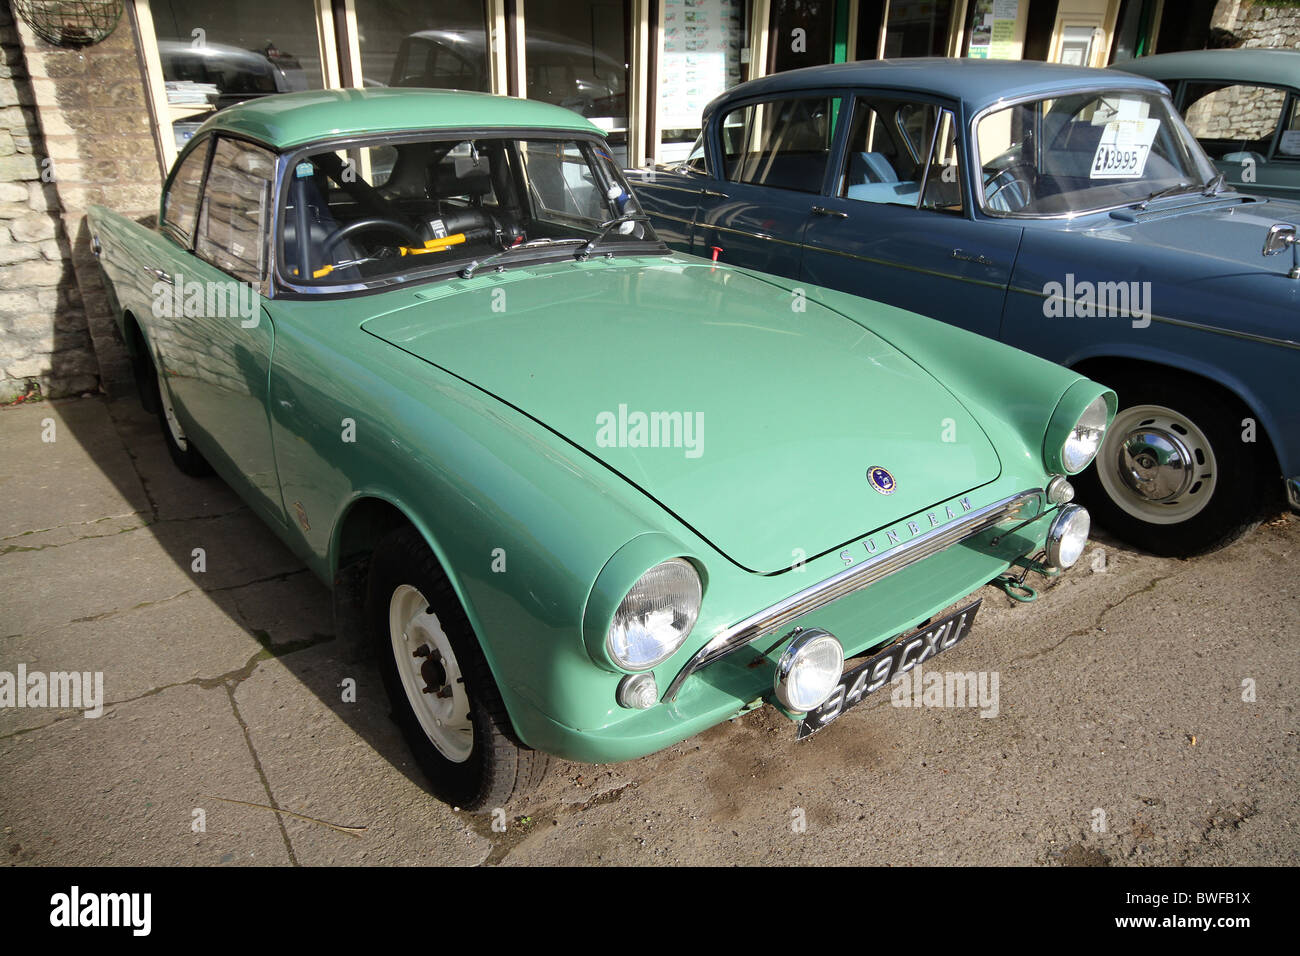 Sunbeam Alpine old sports car used for racing then offered for sale in garage. Stock Photo